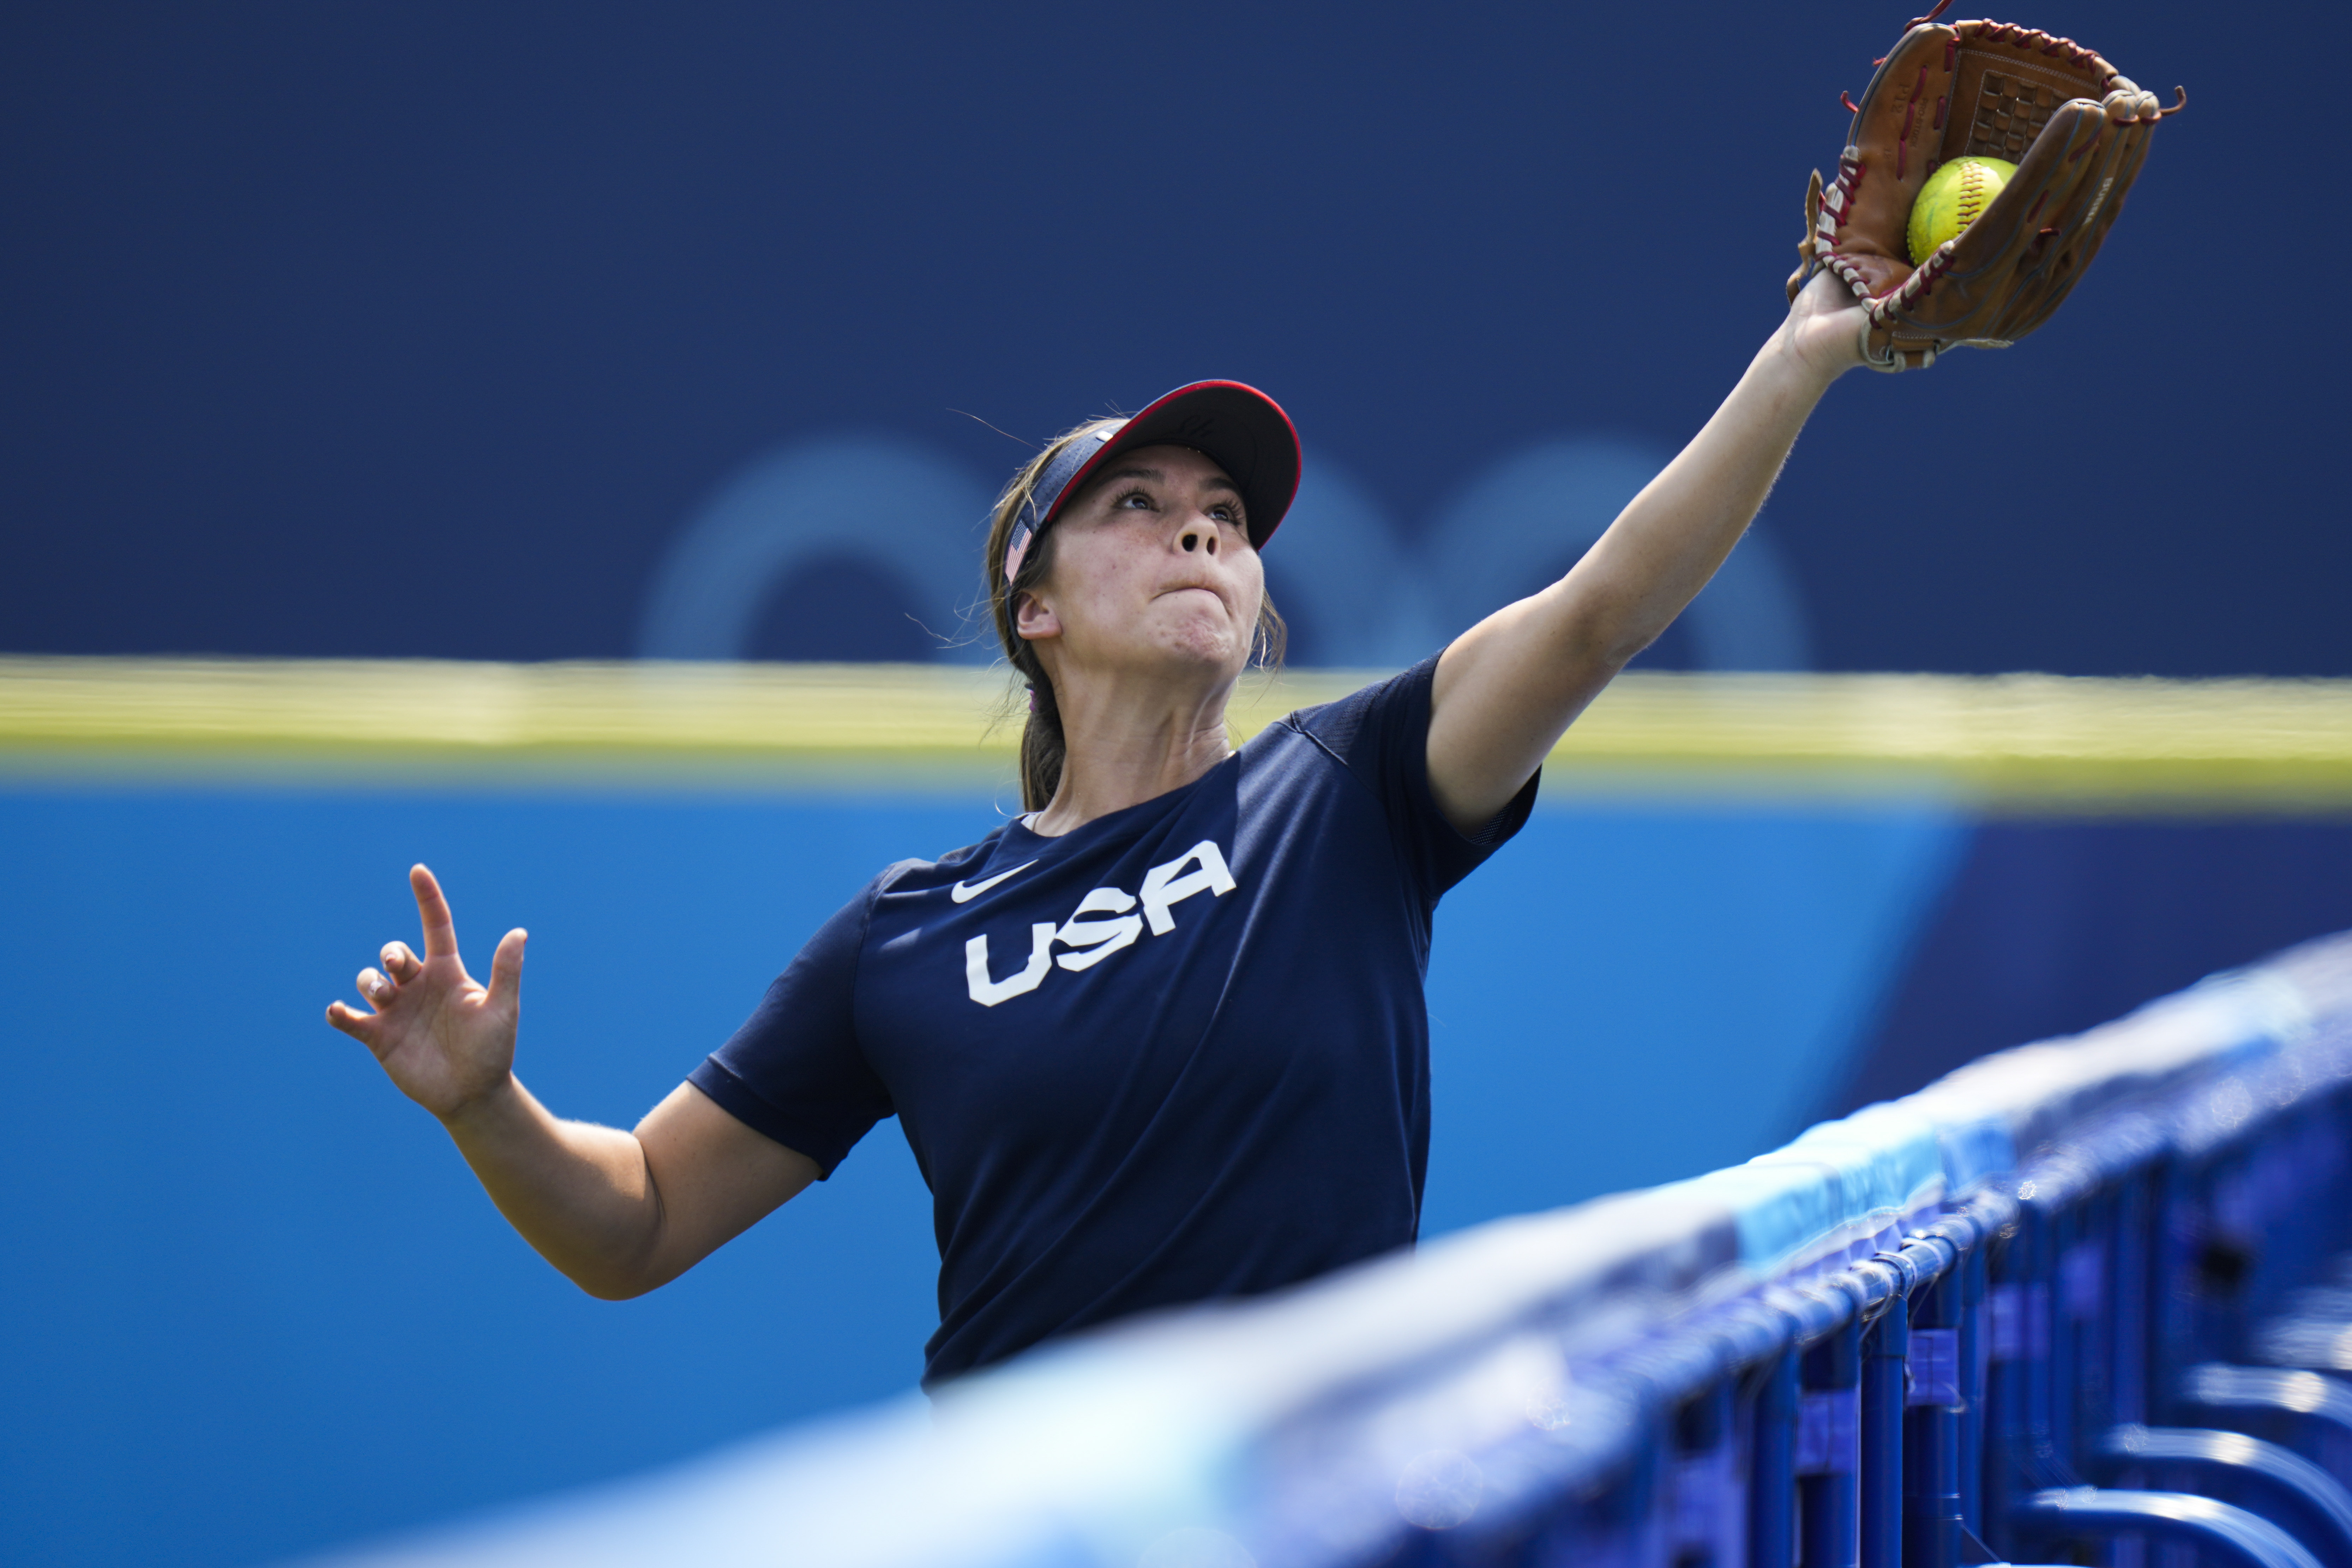 Softball is back at 2021 Olympics, heres how to watch Free live stream, TV schedule for Team USA and more